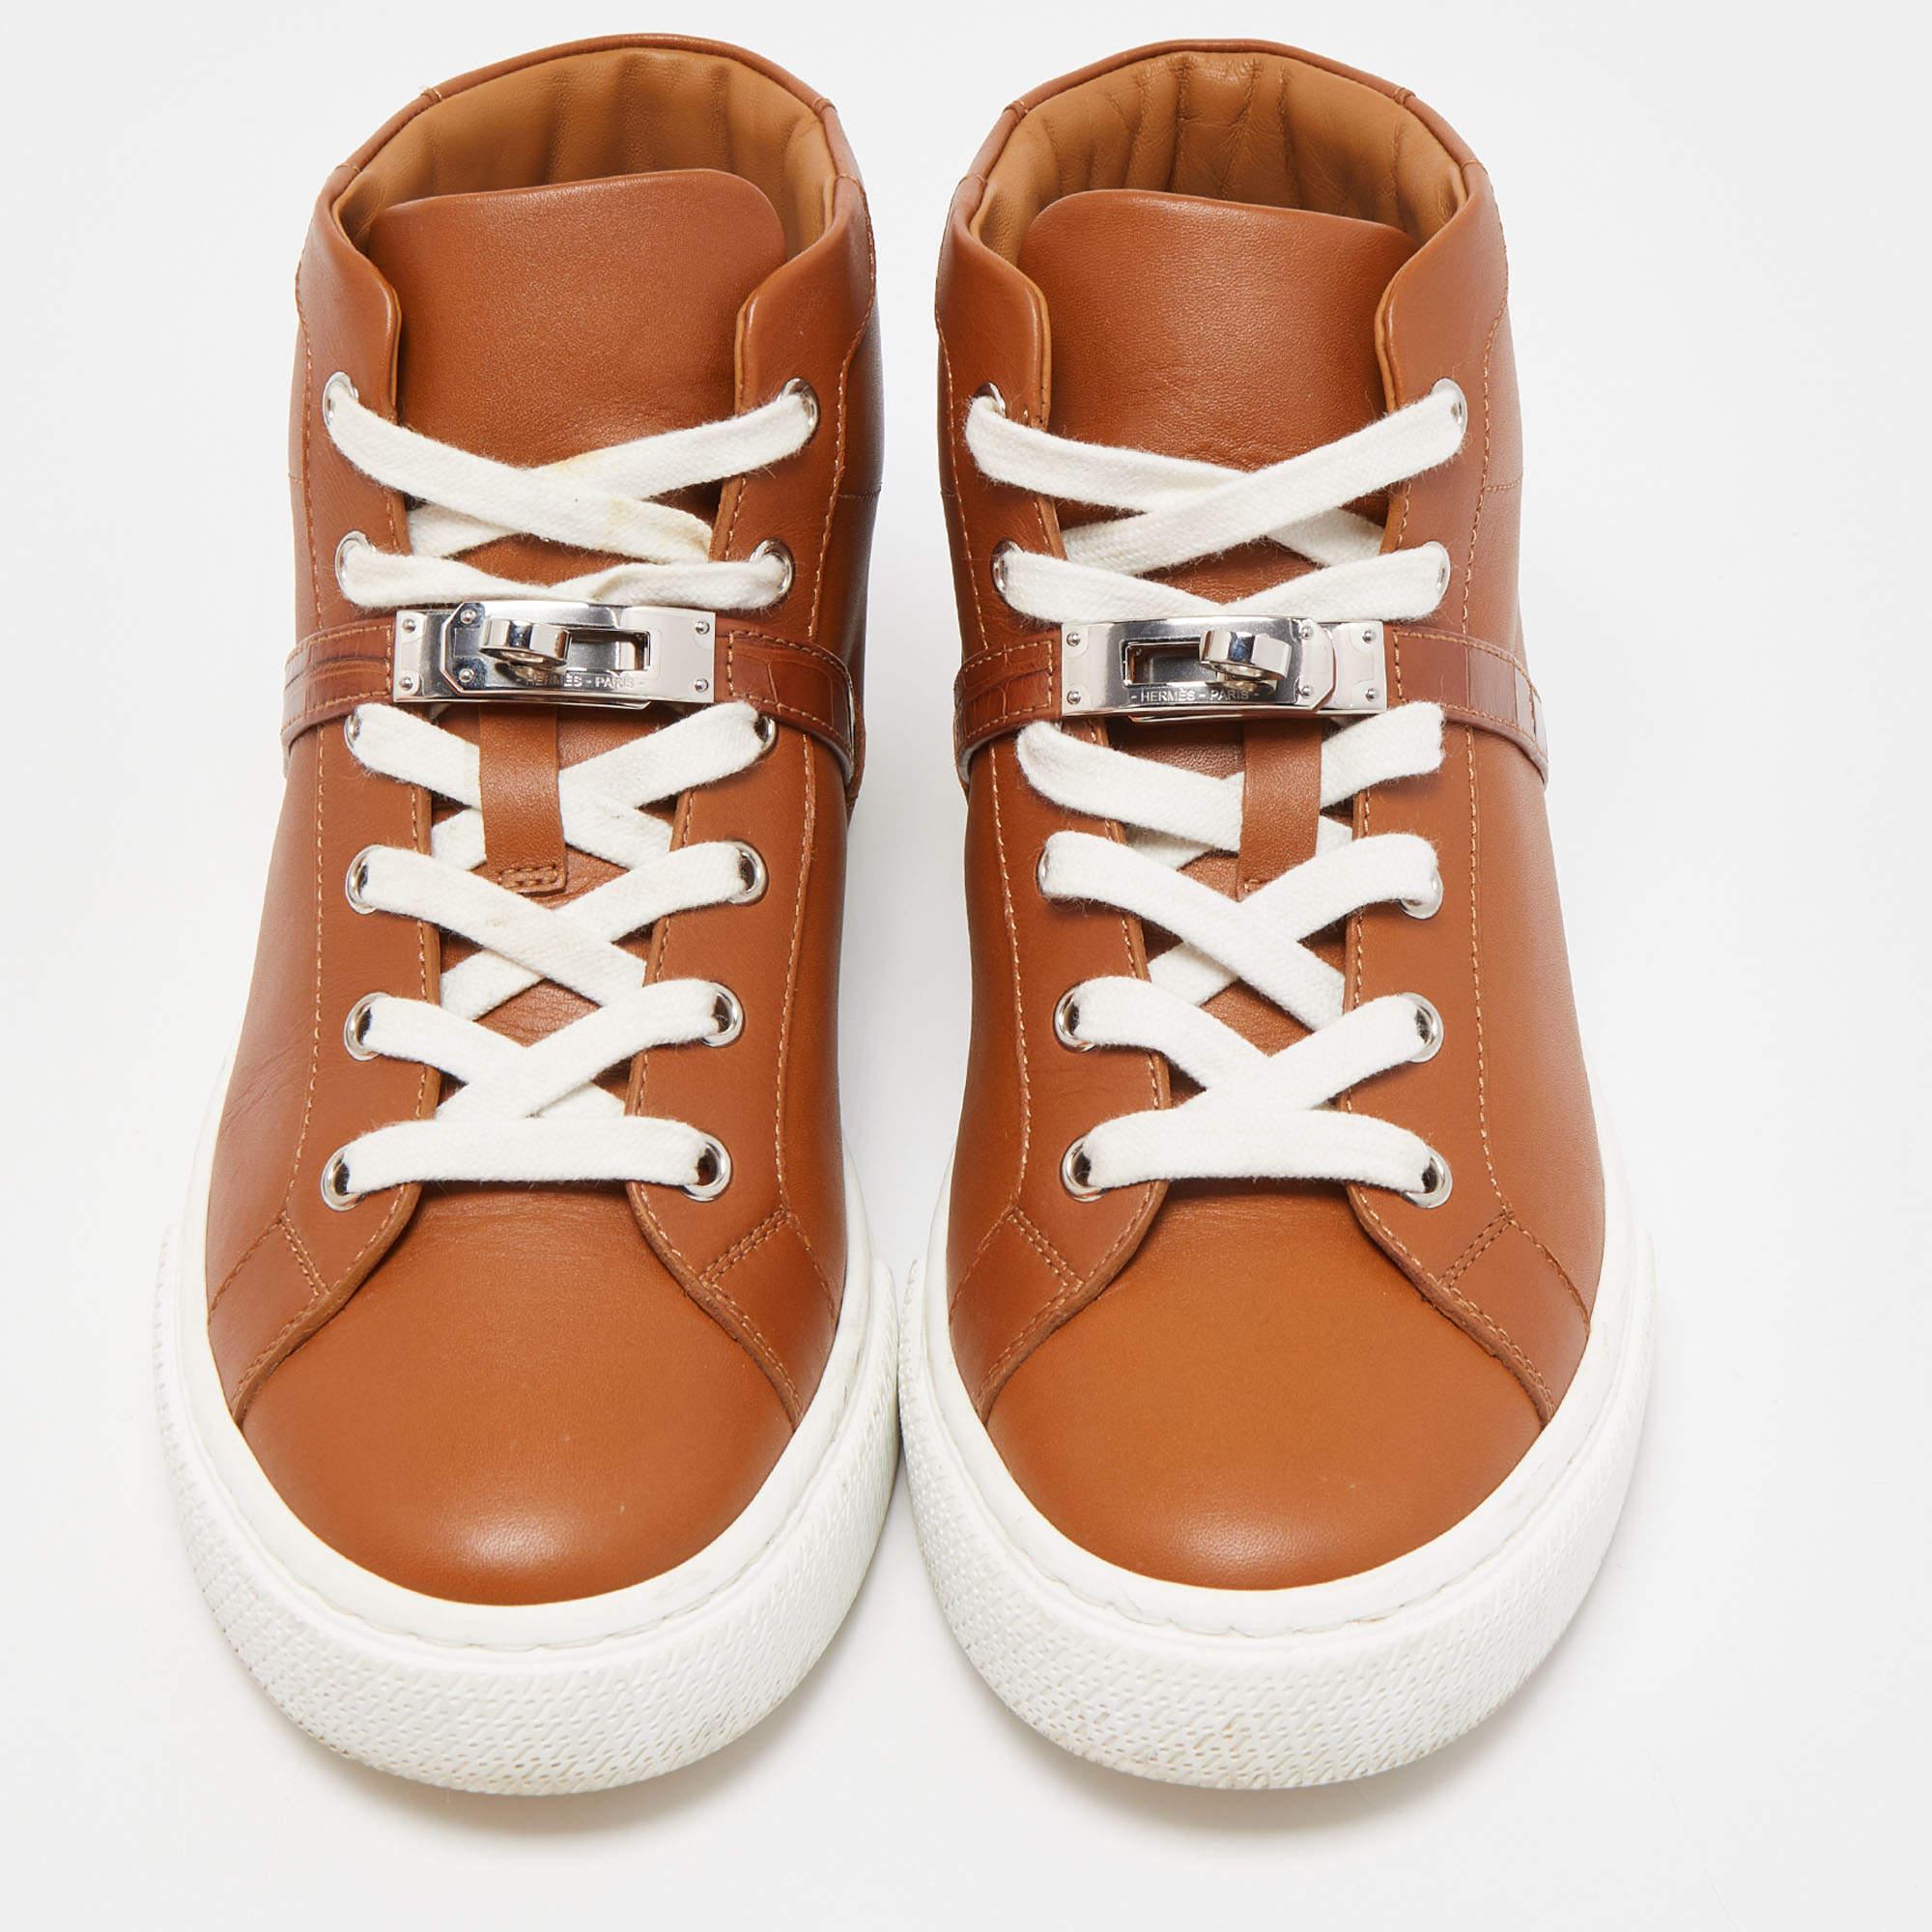 Comfort and high fashion are brought together in these fabulous sneakers from Hermes. They have been crafted from high-quality materials into a sturdy design. Add them to your closet and walk the streets in style!

Includes: Original Dustbag,